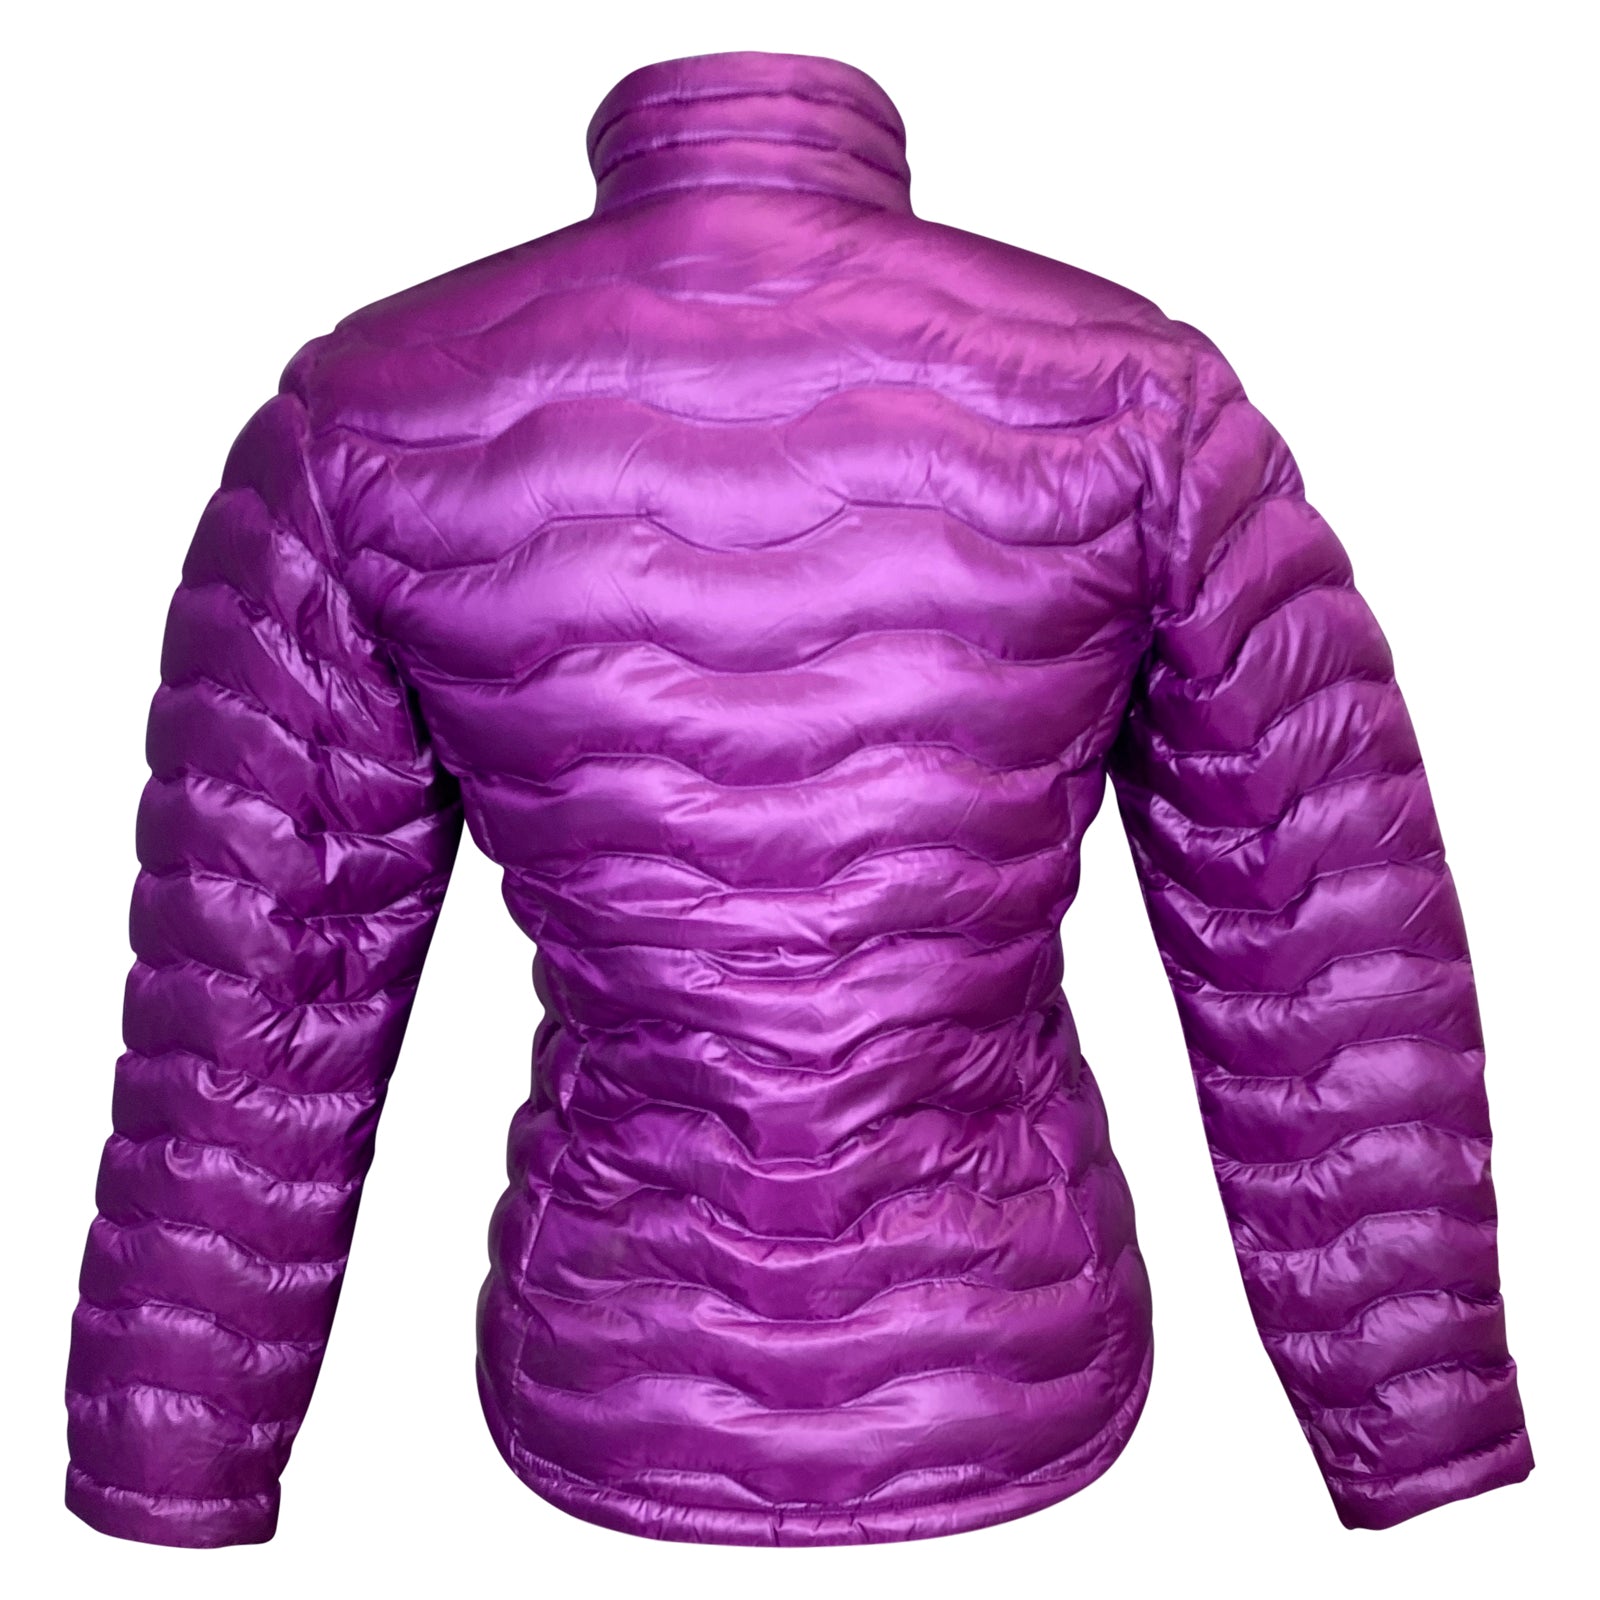 Ariat 'Ideal' Down Jacket in Violet